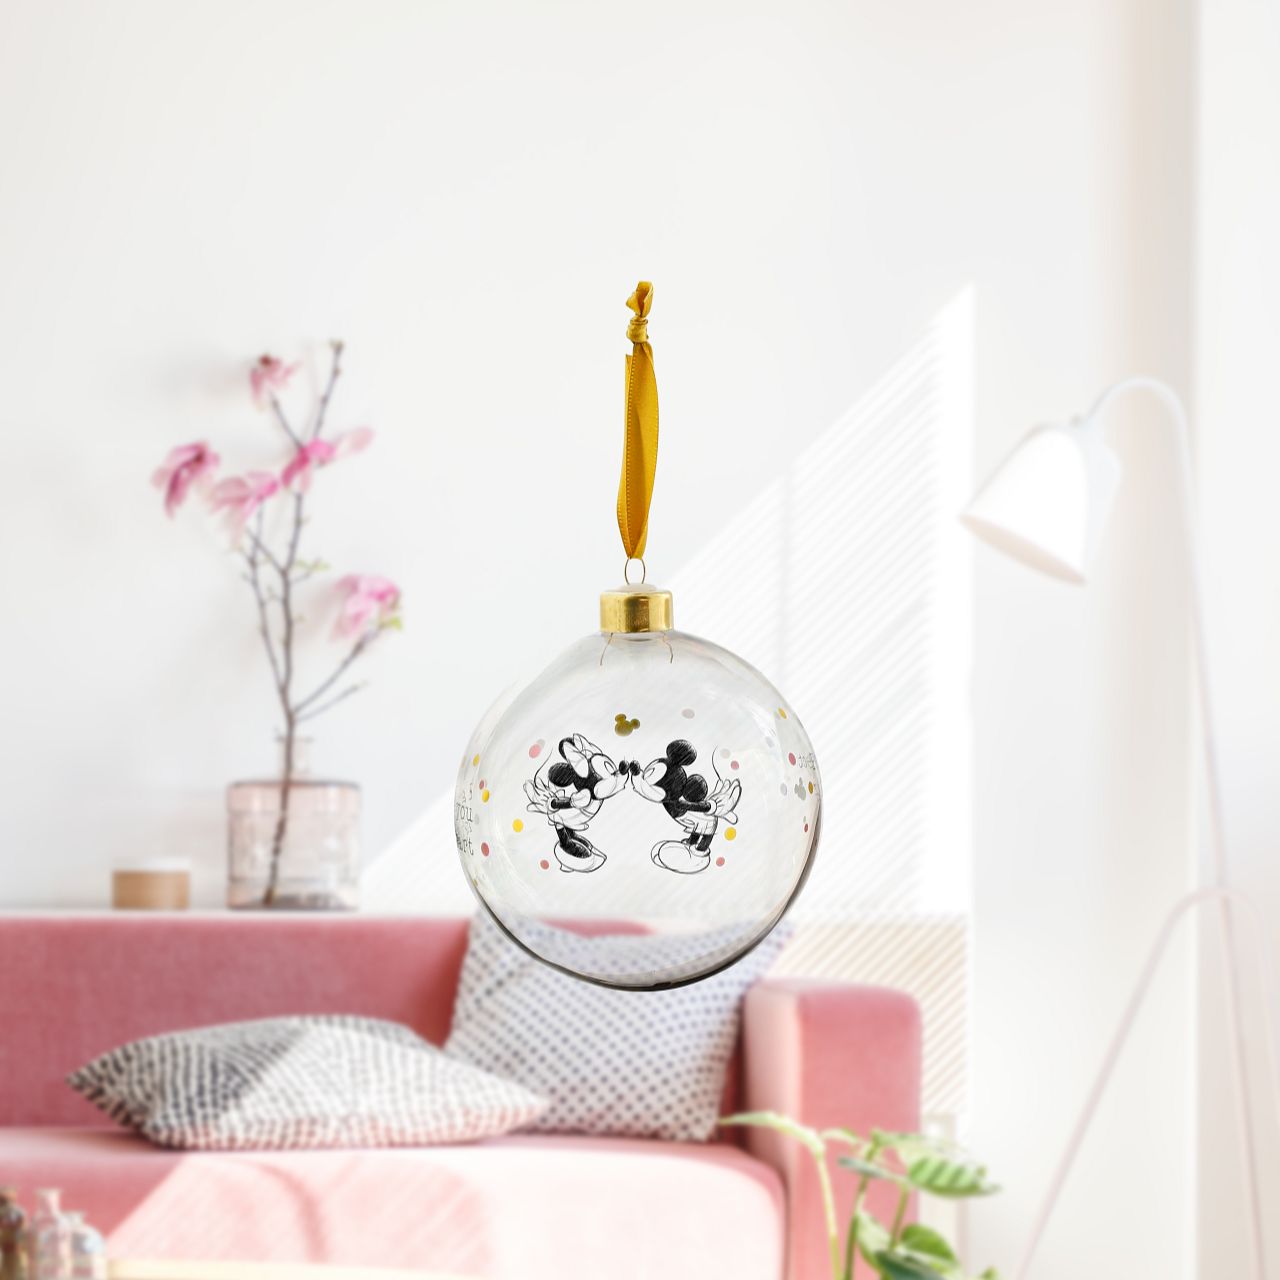 Disney Mickey and Minnie Mouse Christmas Bauble  This glass Mickey and Minnie Mouse bauble is the perfect gift to remind the happy couple they are the perfect pair. The bauble is strung with gold ribbon and is presented in a Disney branded gift box.